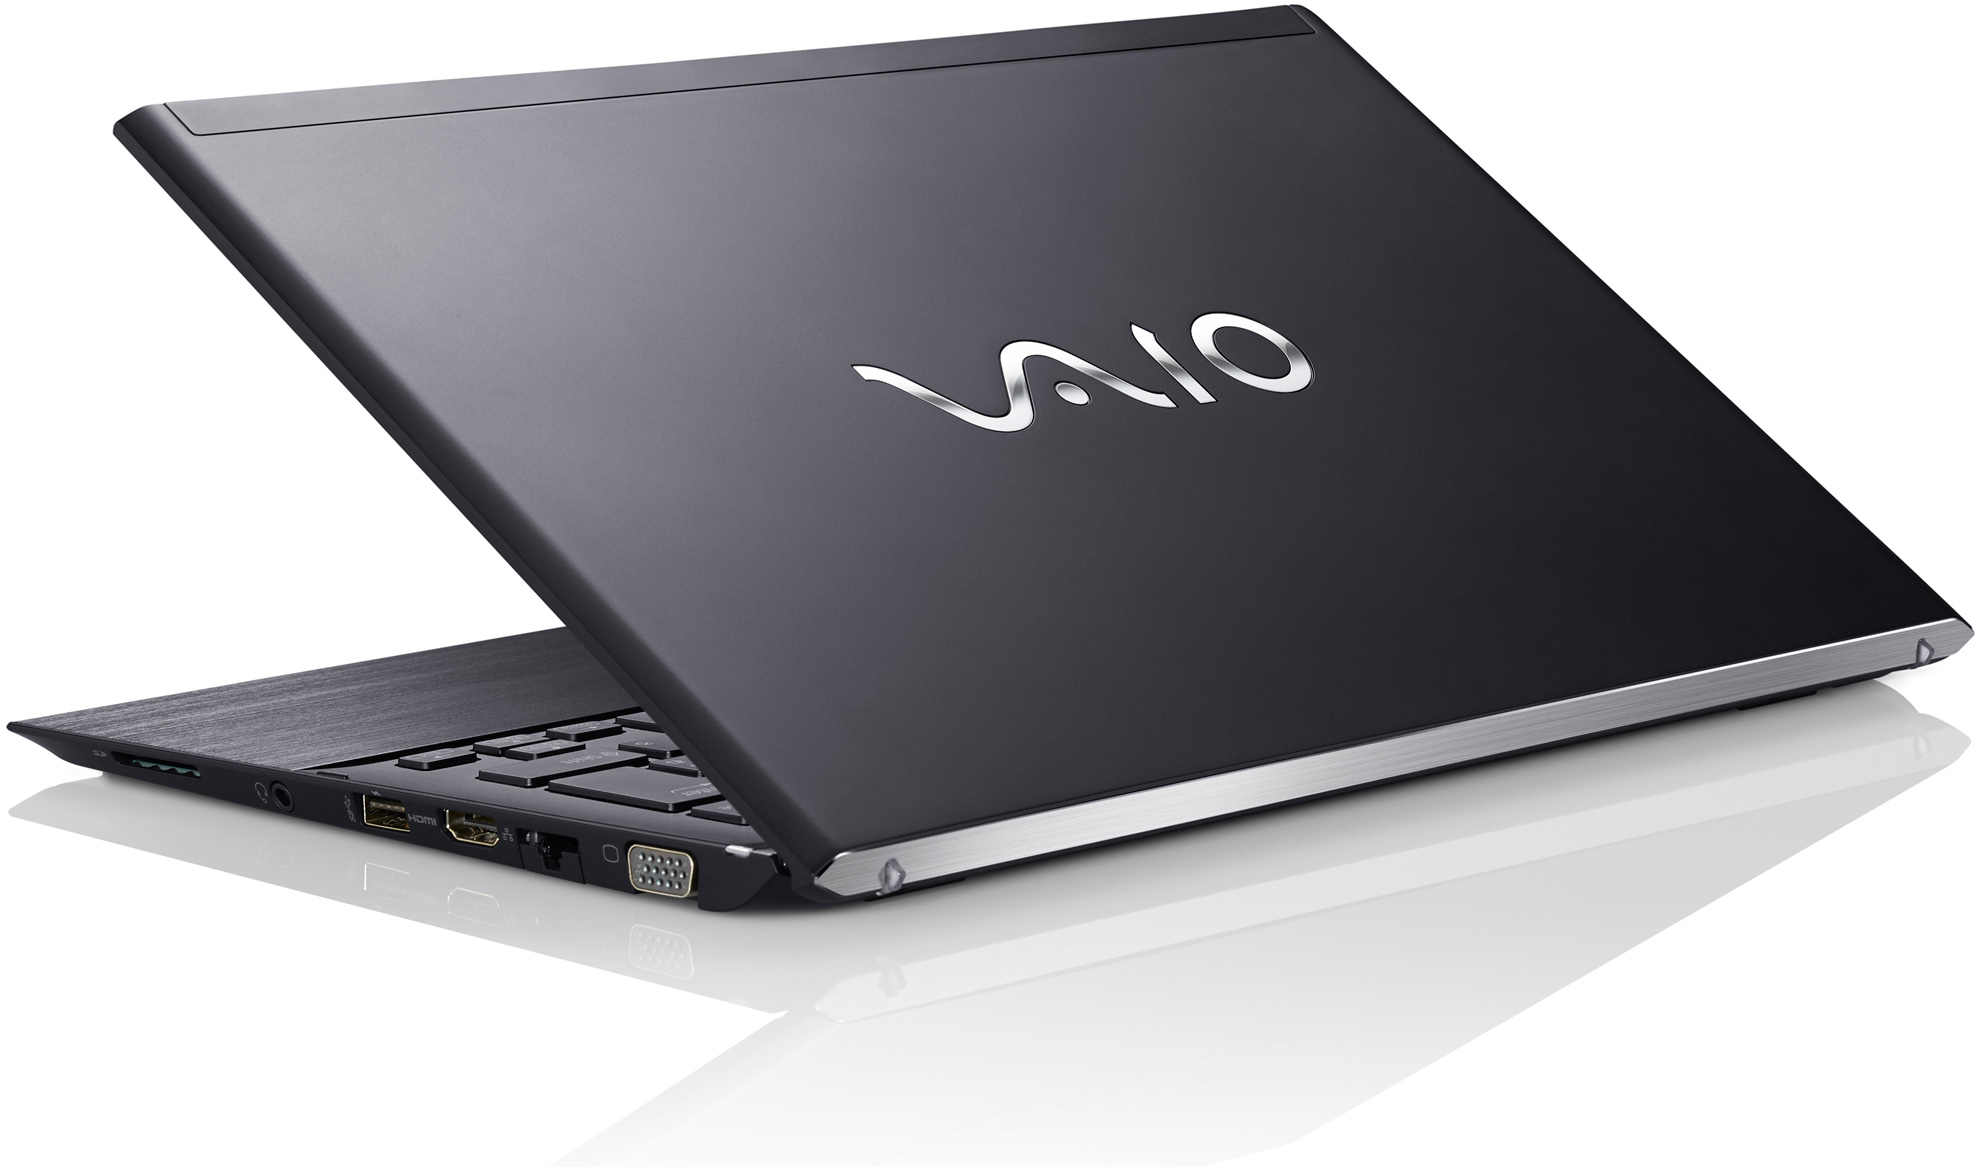 Sony laptops are back: Vaio SX14 – Direction Forward